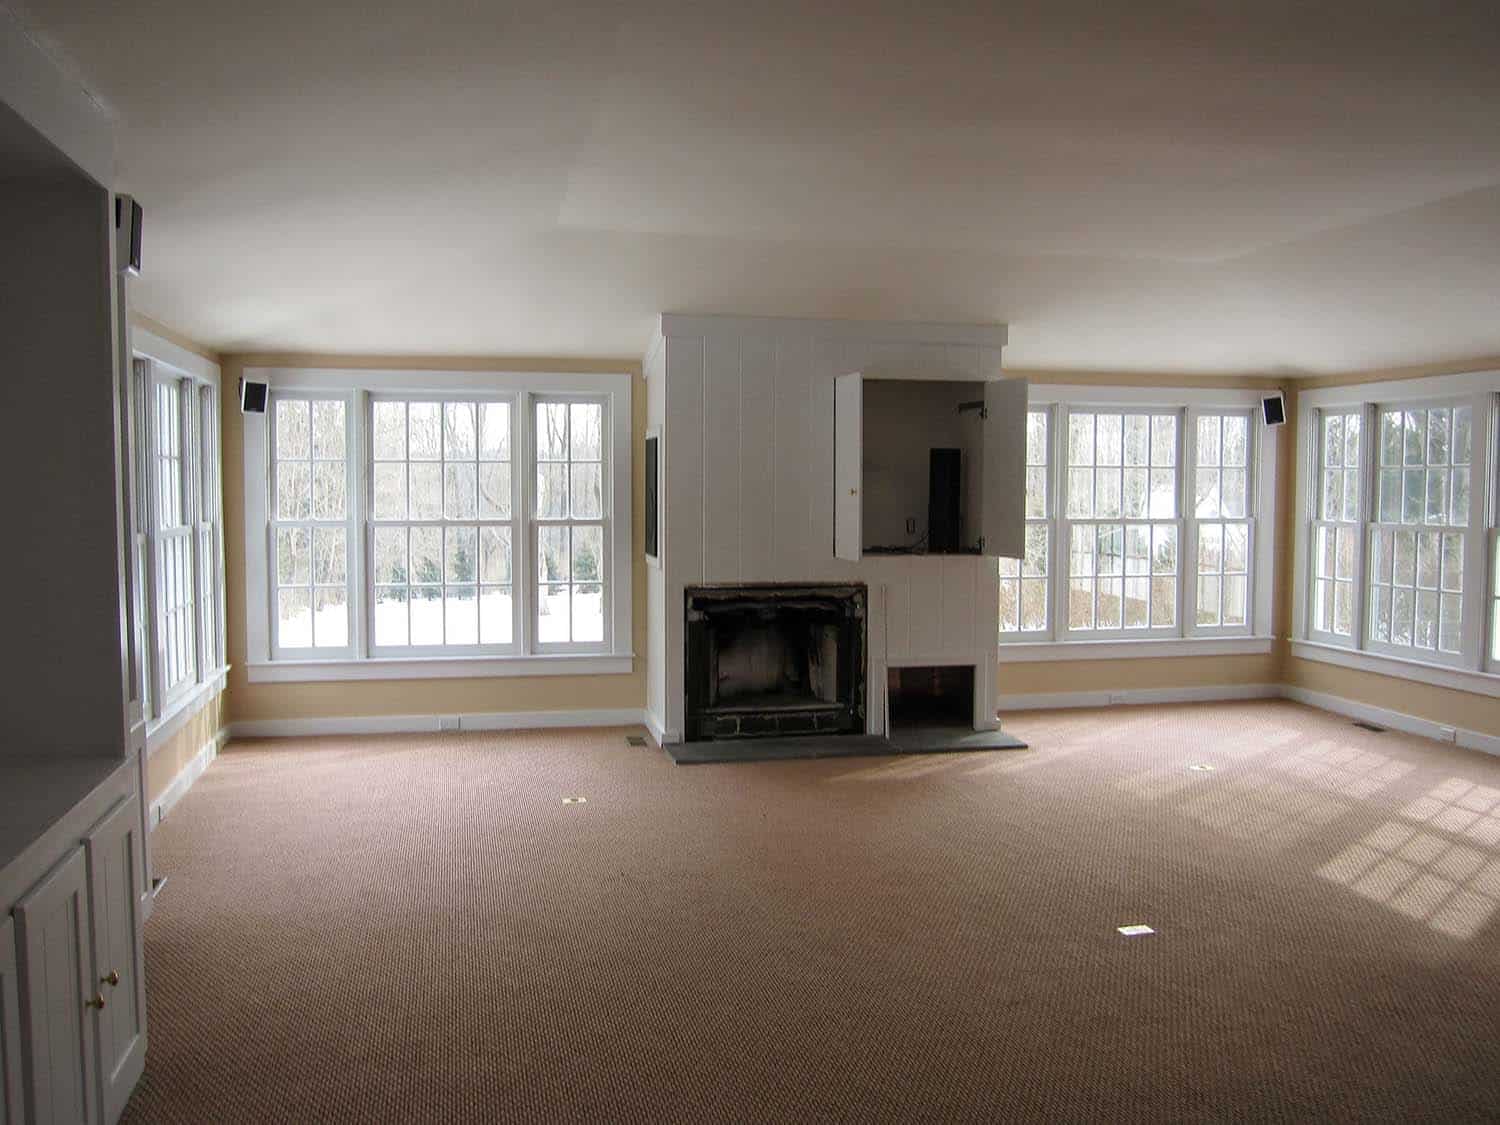 living room before the renovation